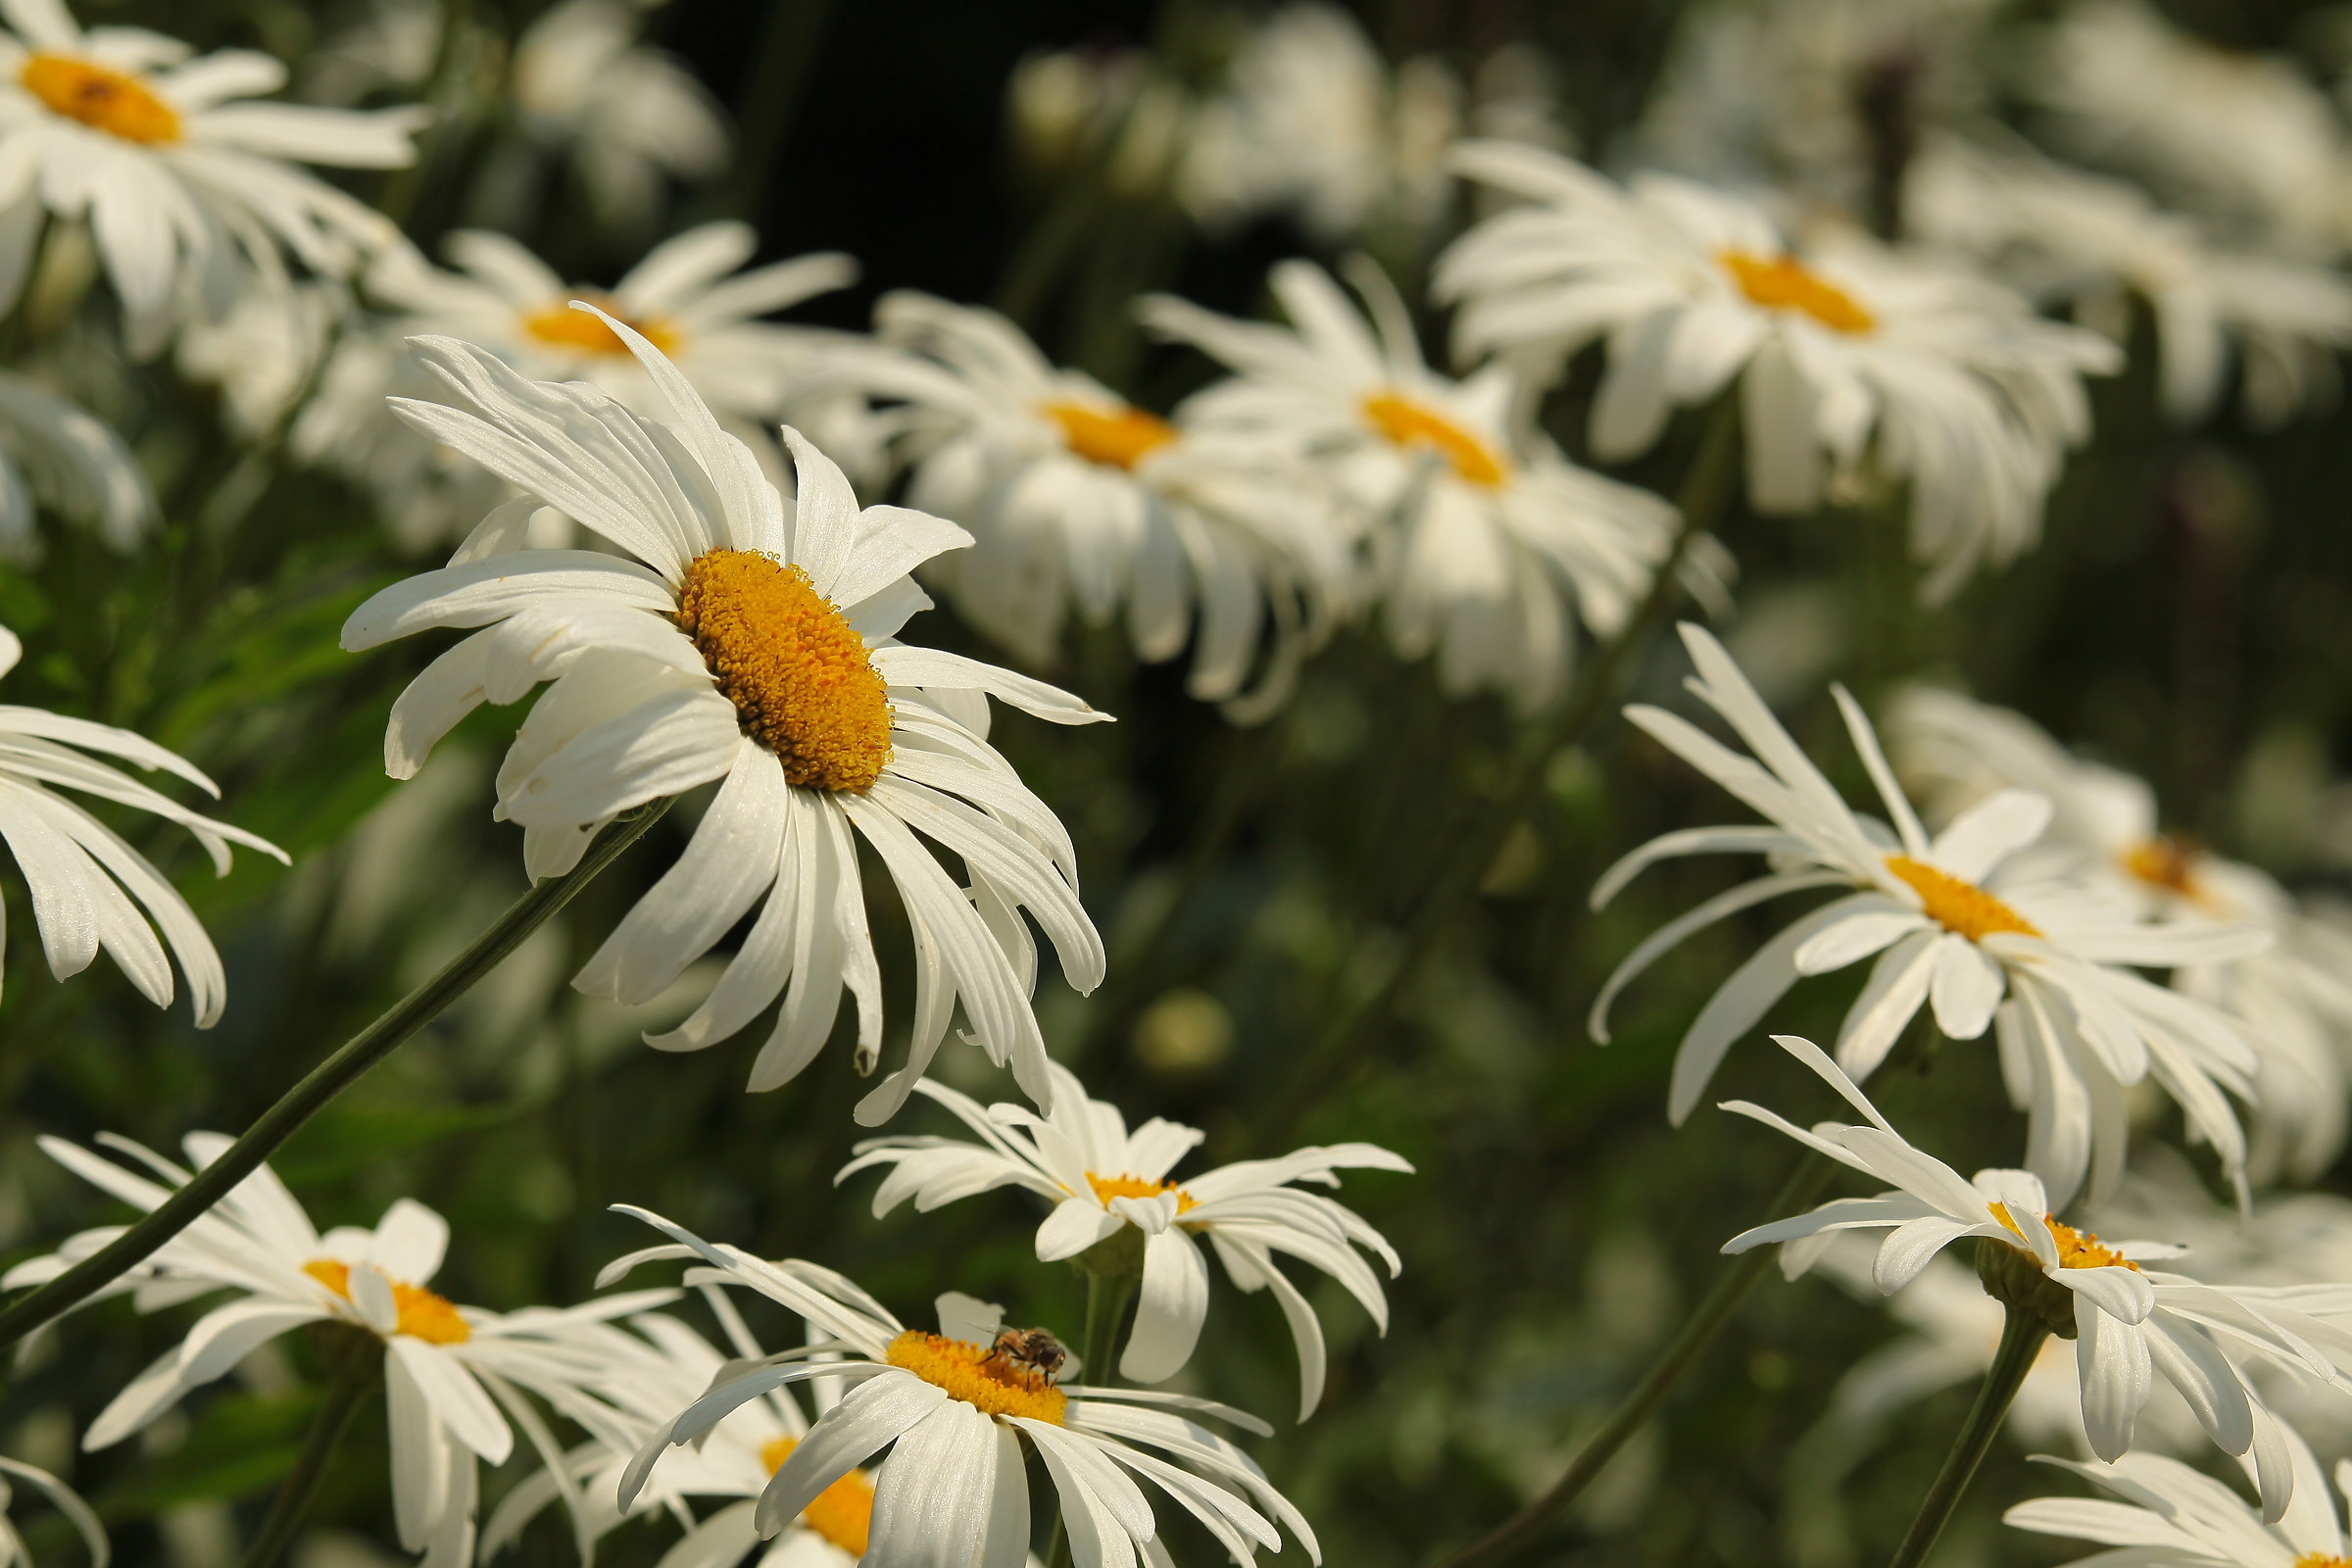 The world of daisies...